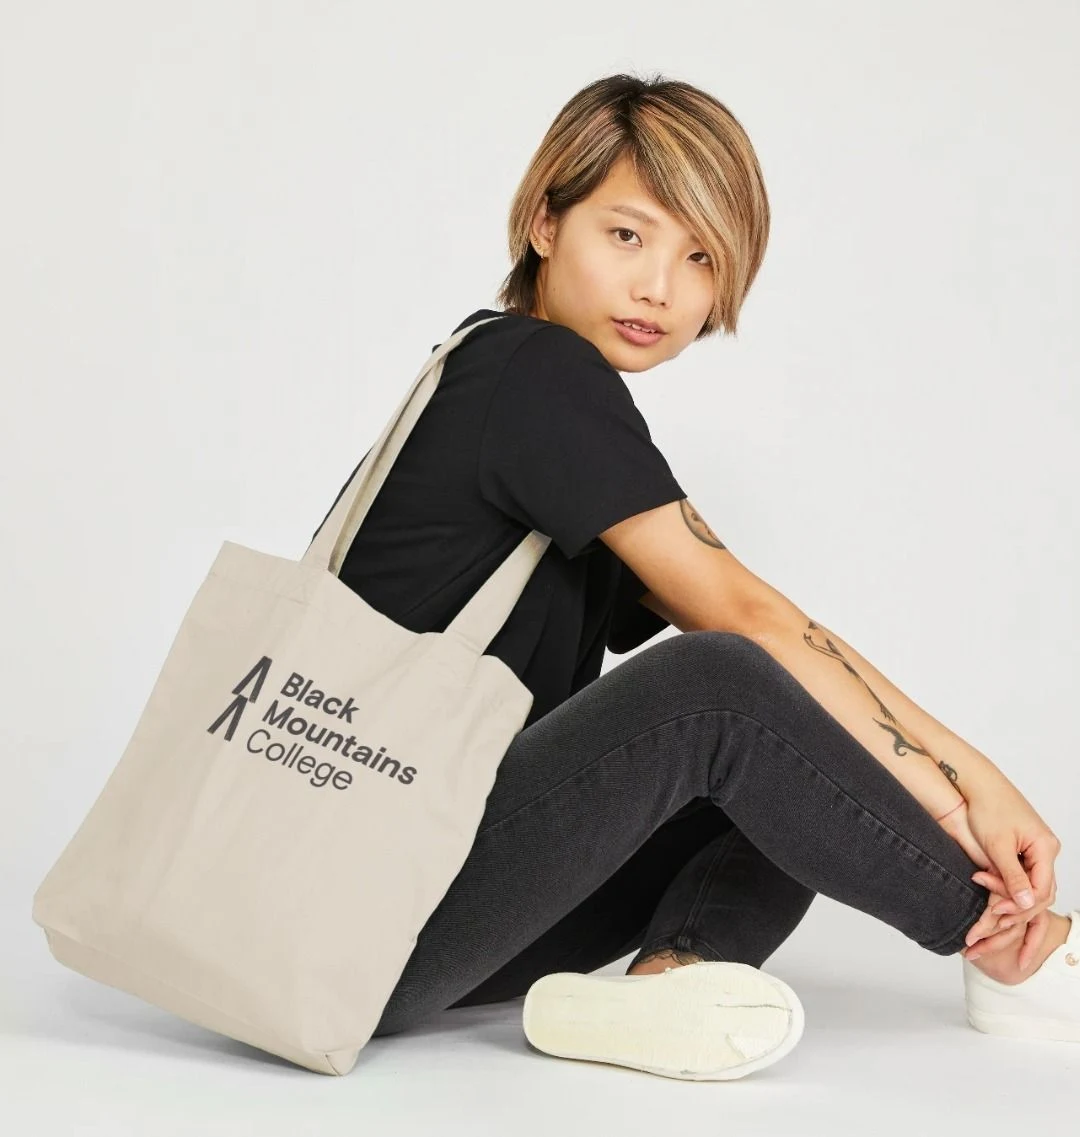 A woman with a Black Mountains College tote bag